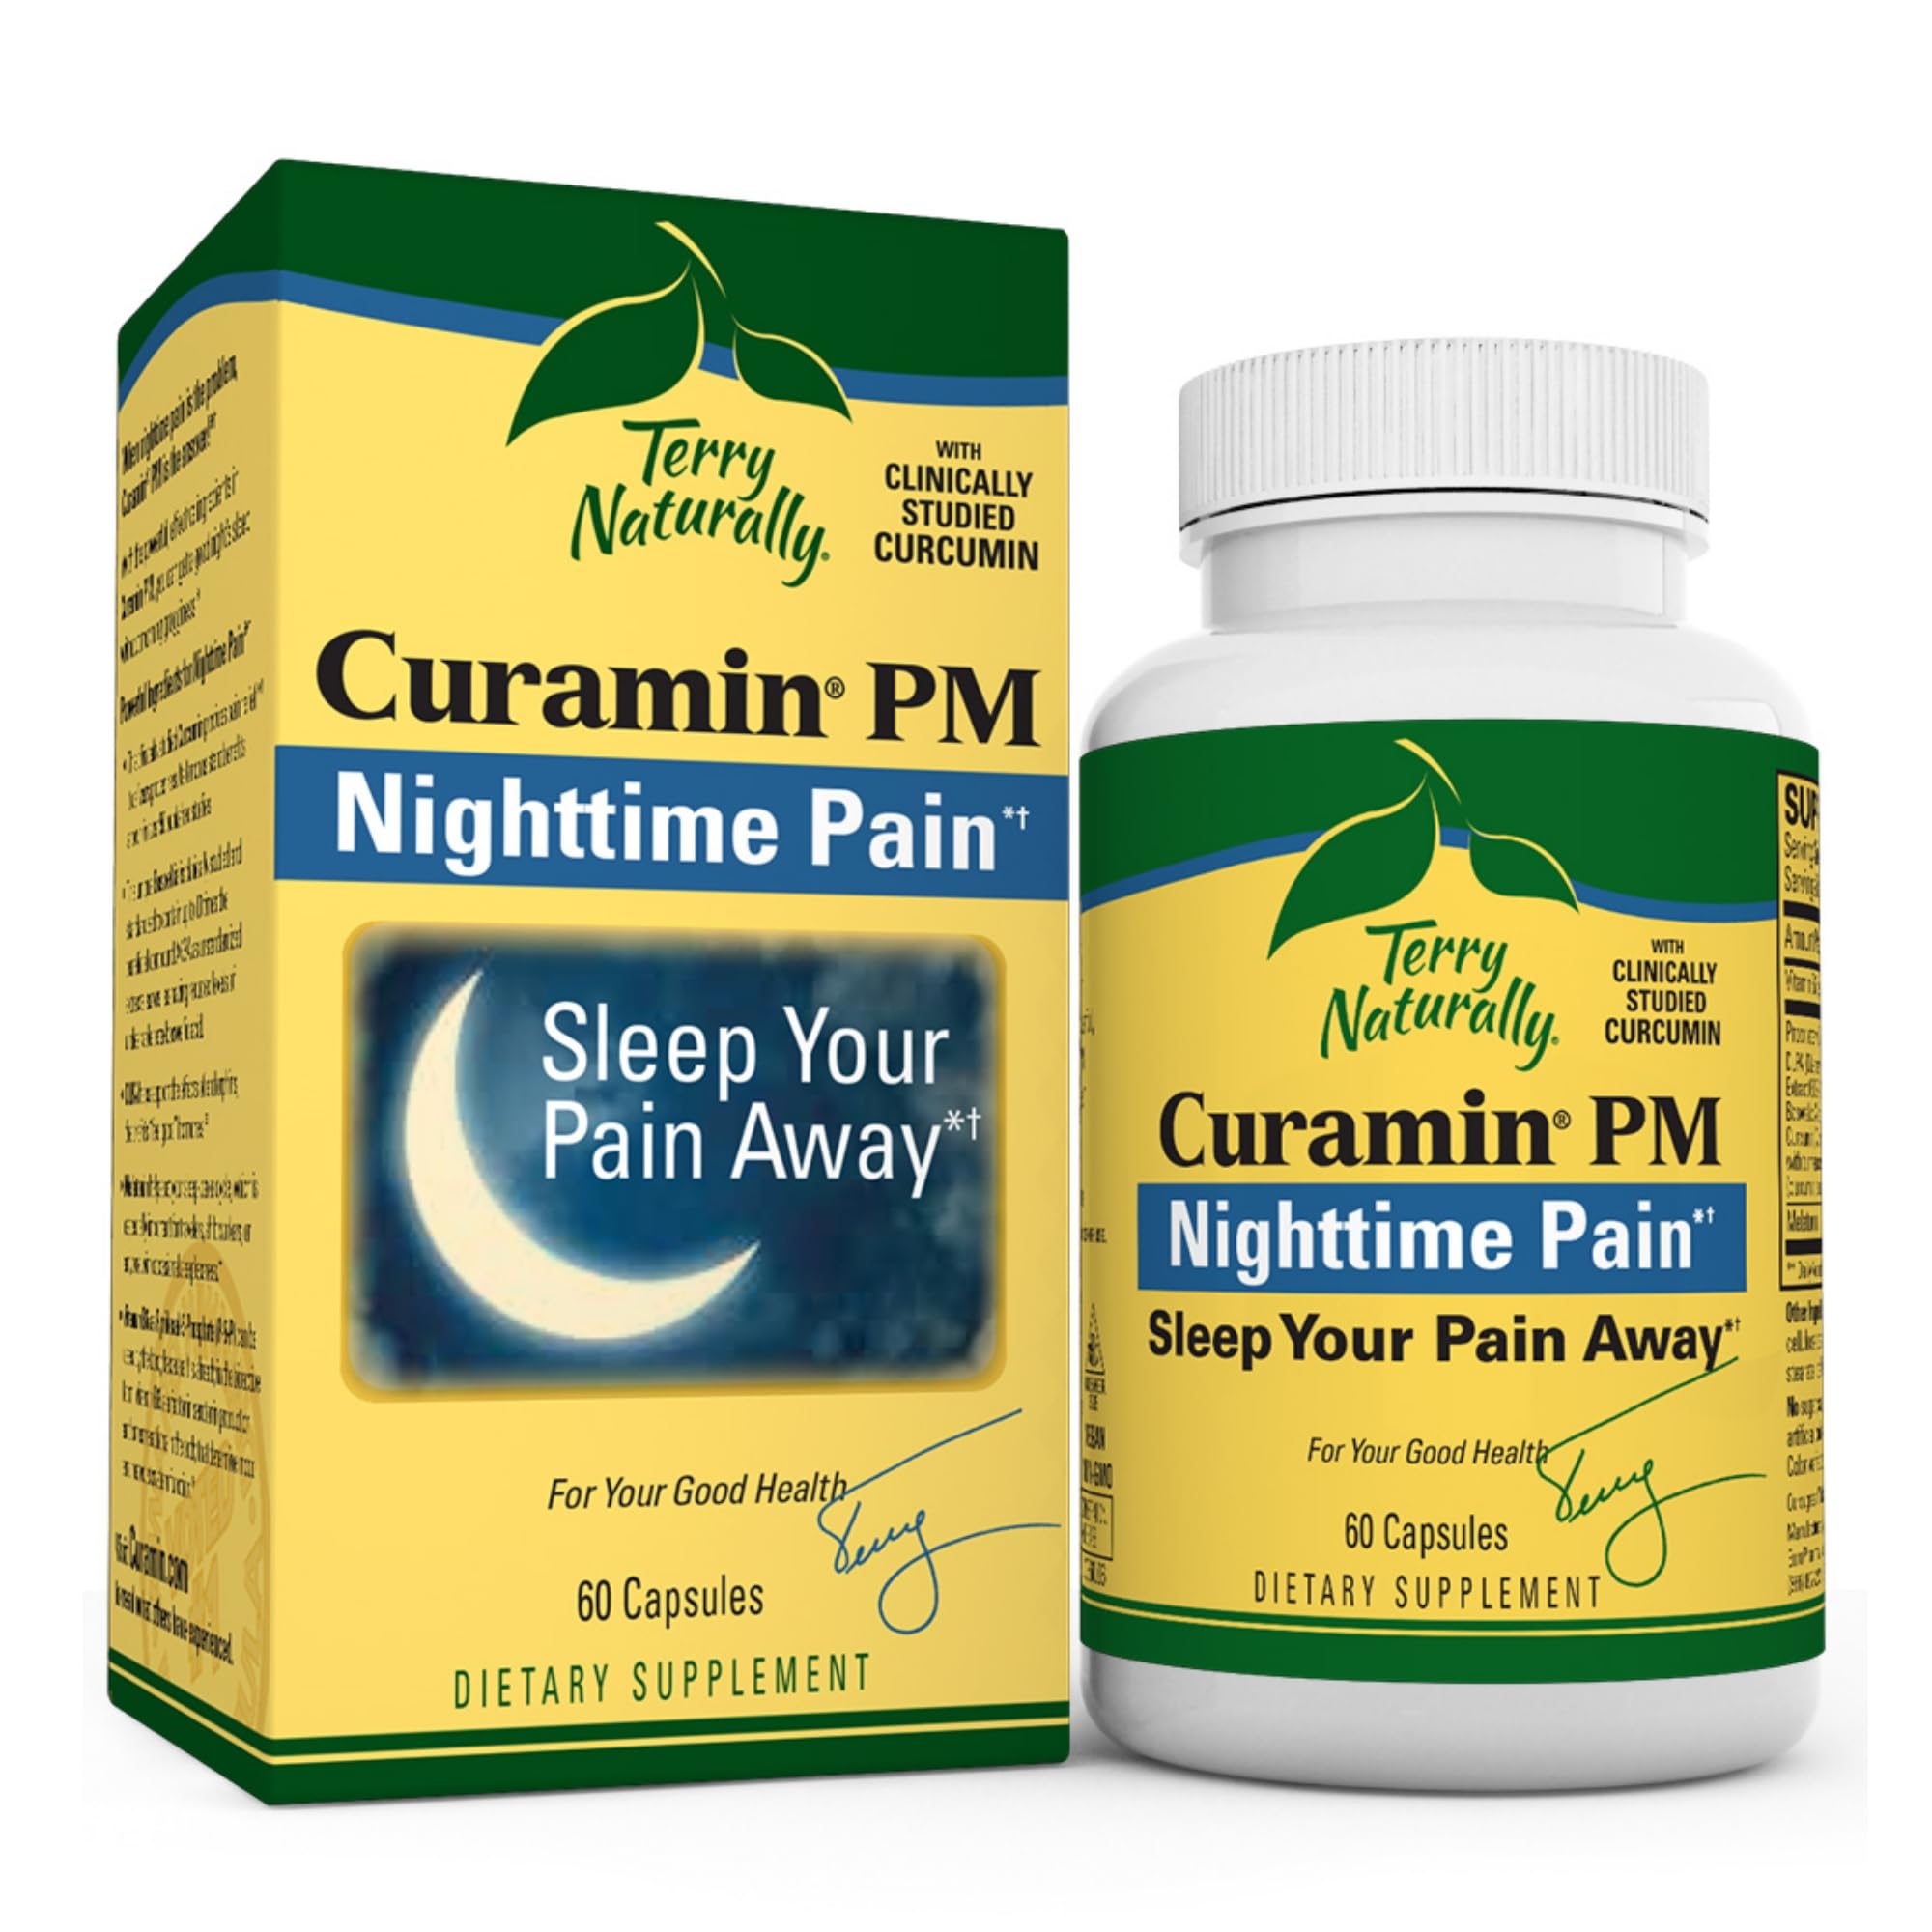 Terry Naturally Curamin PM - 60 Capsules - Non-Habit Forming Nighttime Pain Relief Supplement, Contains Curcumin & Melatonin - Non-GMO, Gluten Free, Kosher - 30 Servings